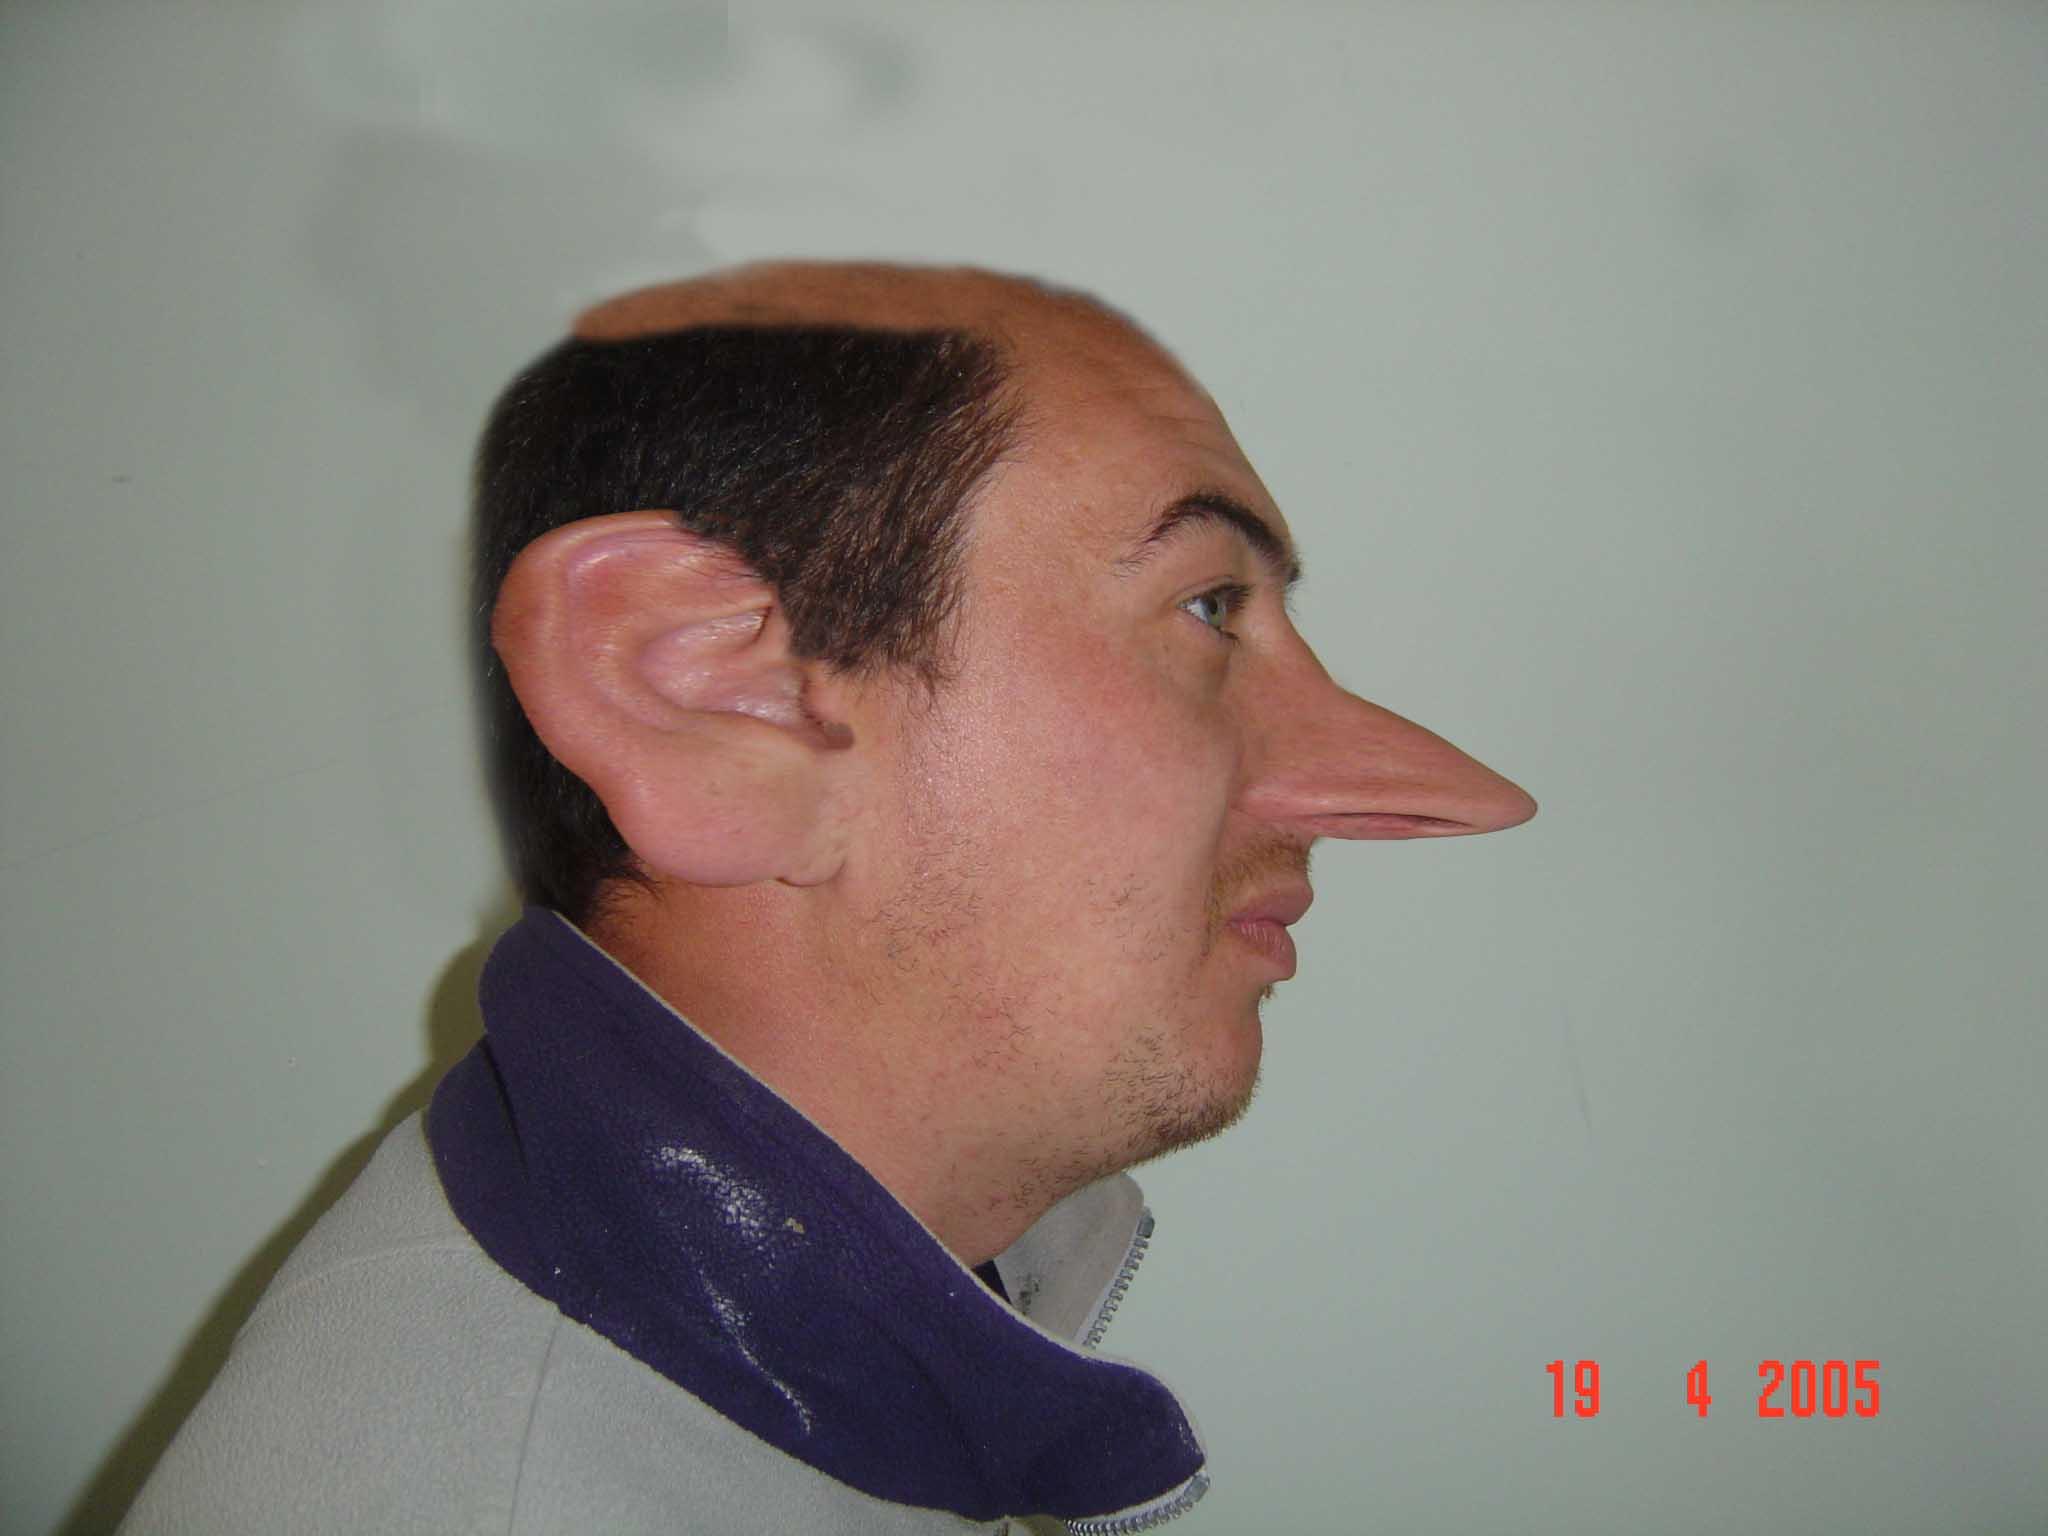 Funny Big Peaked Nose Man Picture